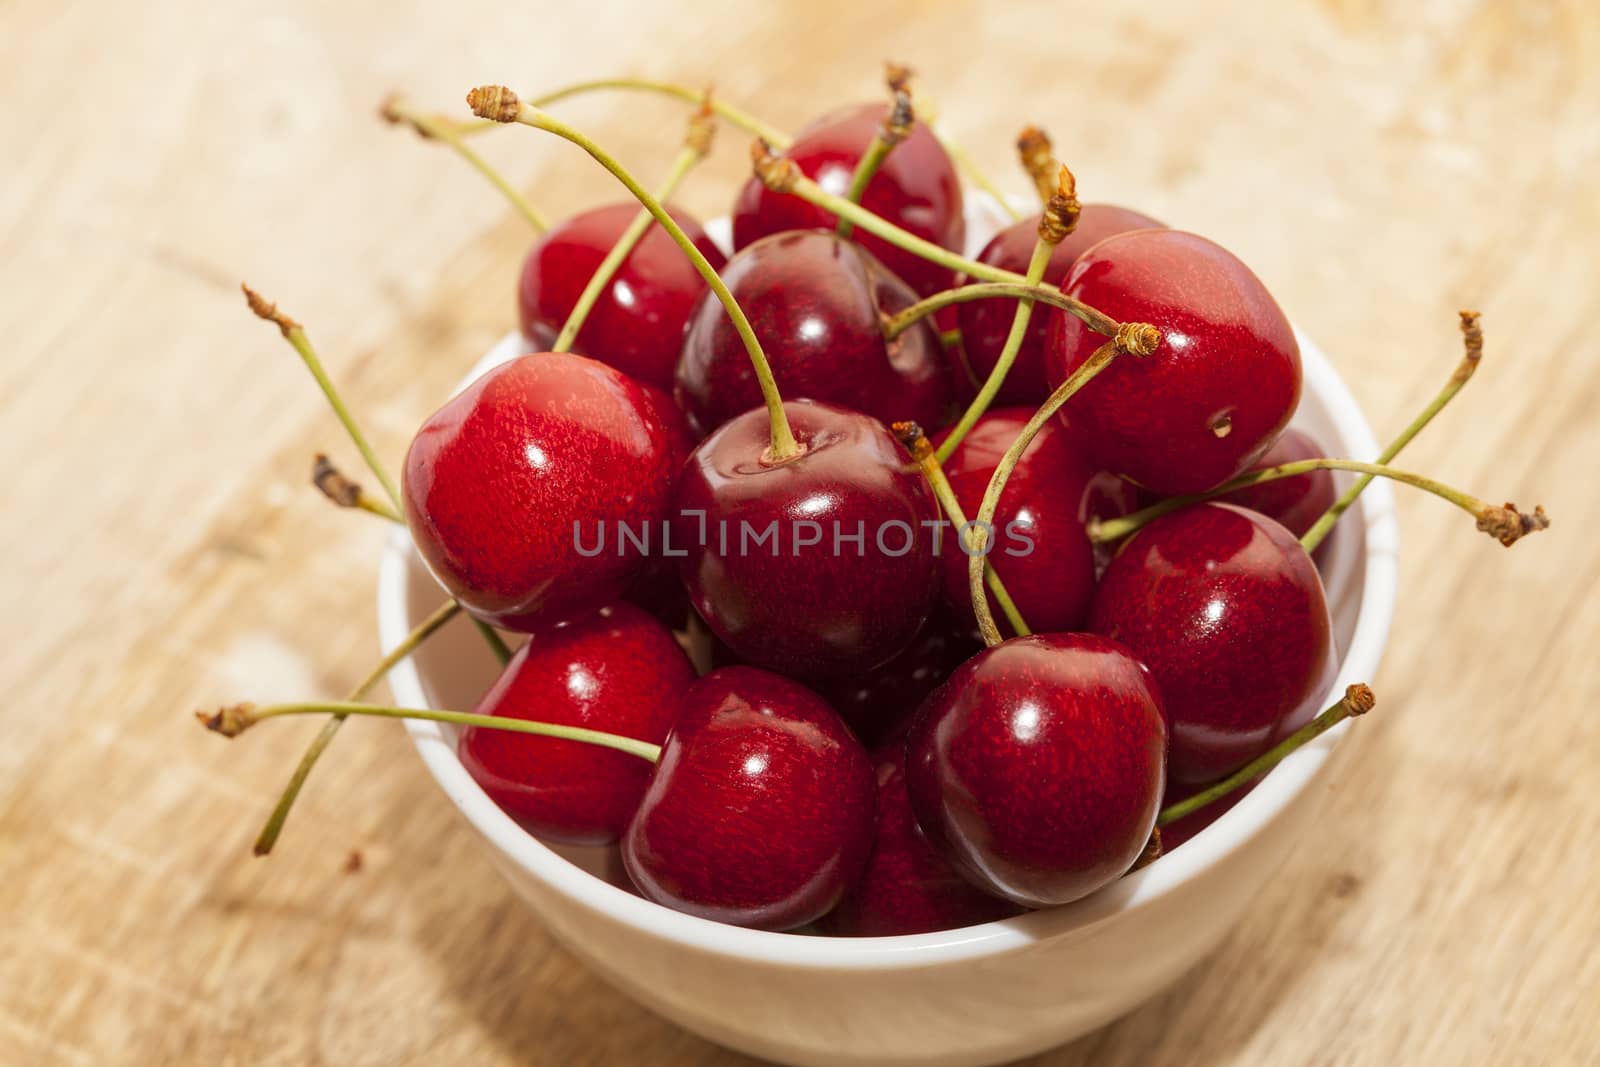 ripe cherry maroon. Berries are together after the harvest. Small depth of field. Photo taken closeup.